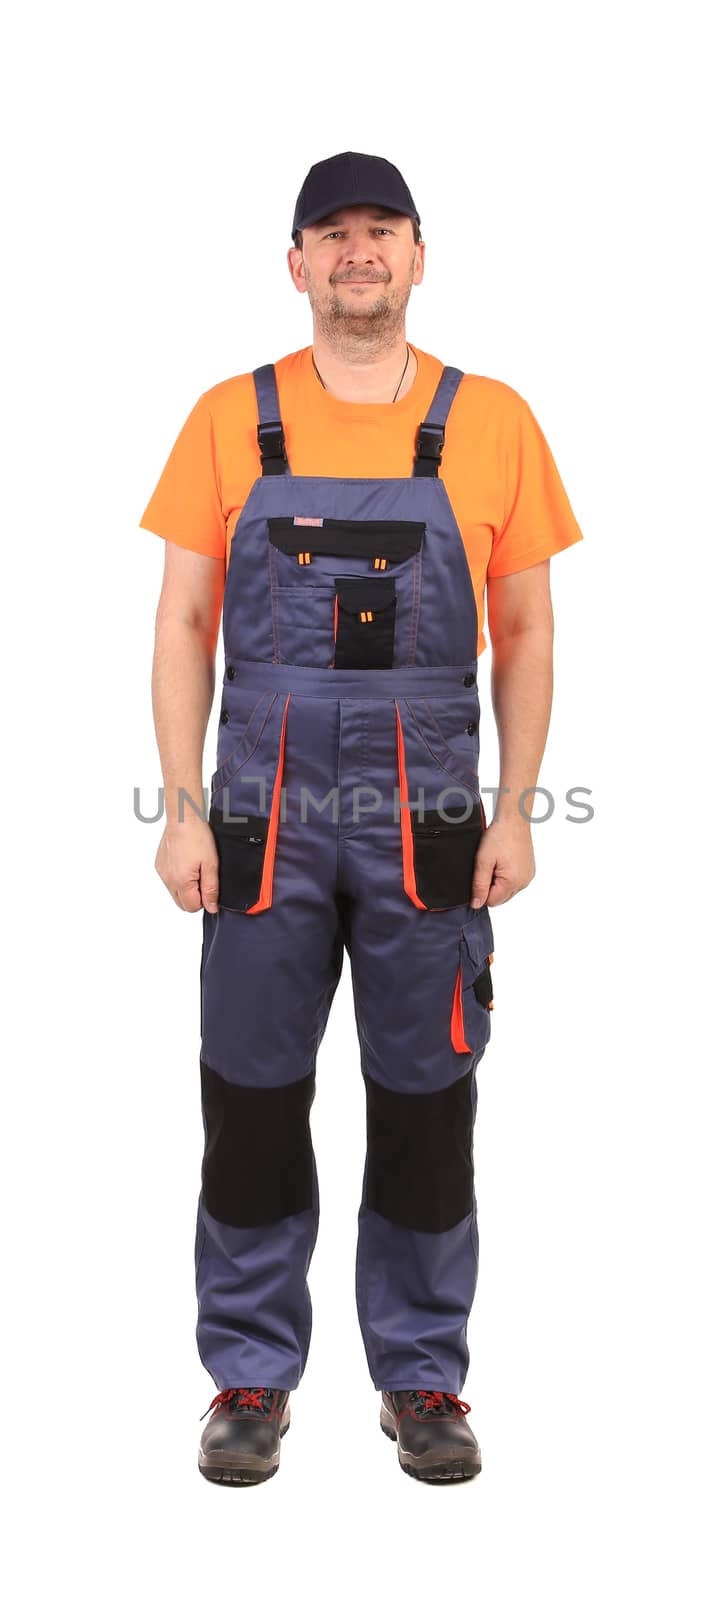 Worker wearing overalls. by indigolotos